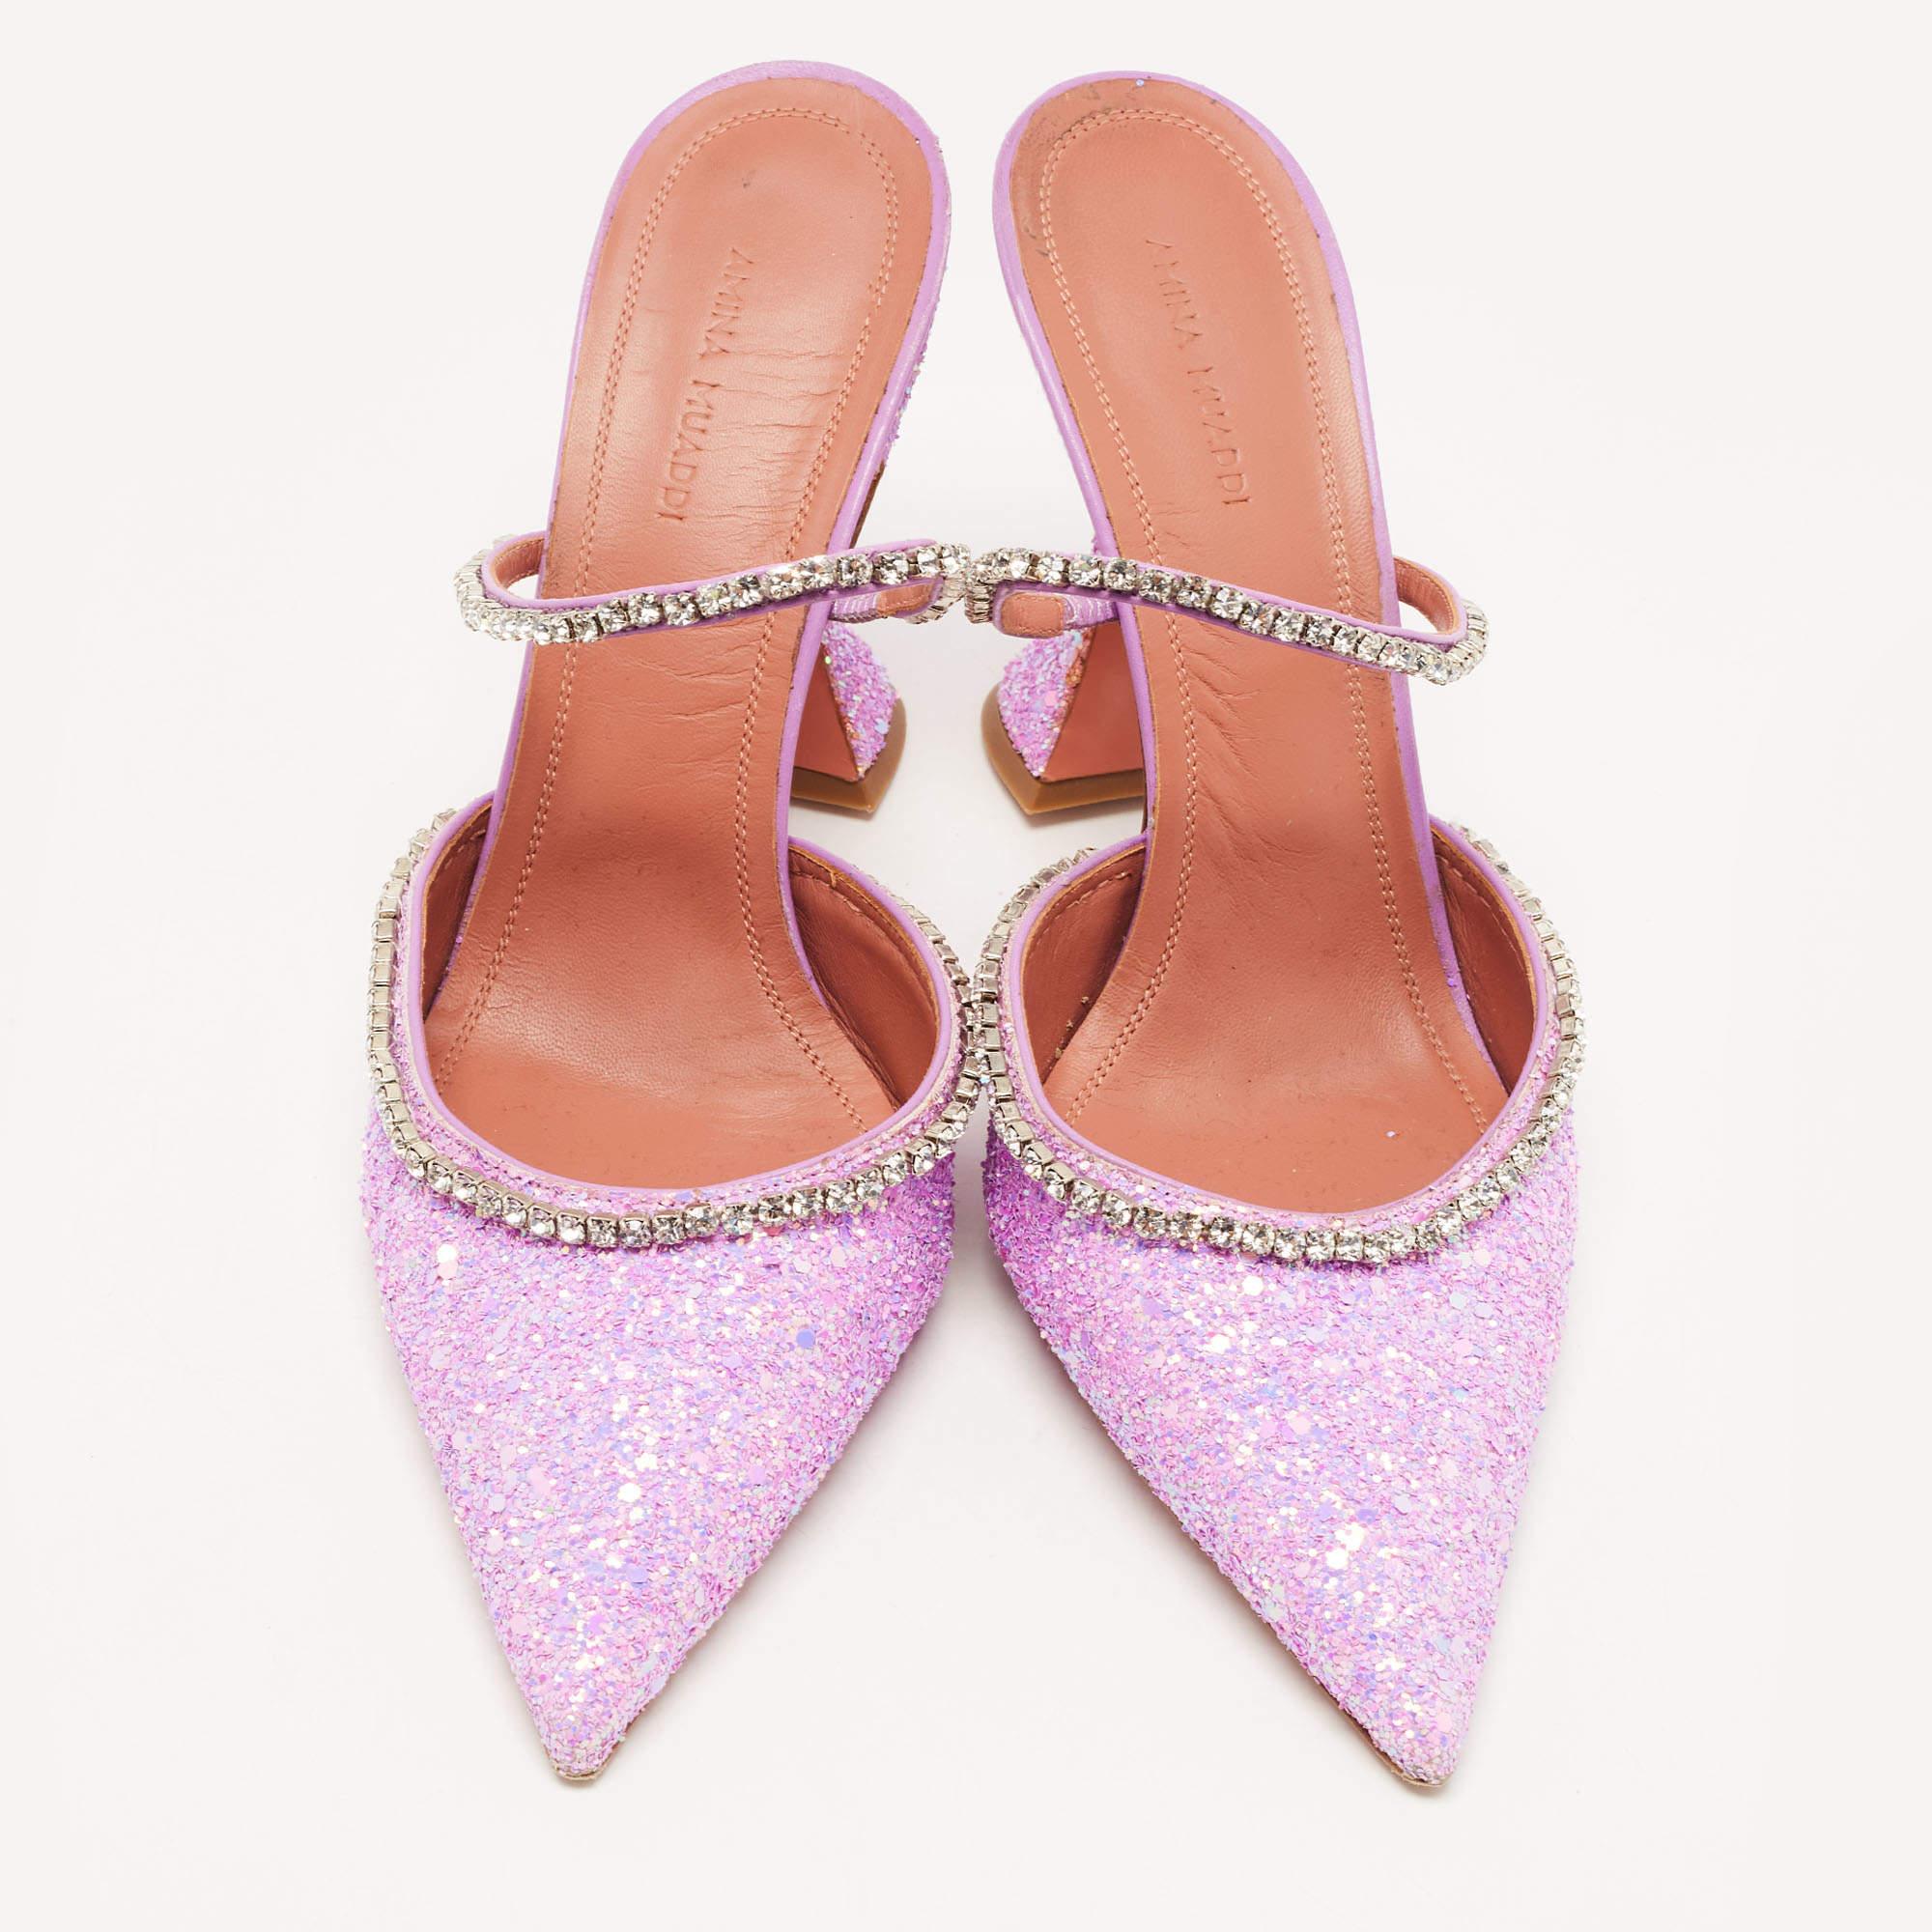 Carved perfectly into a feminine silhouette, this pair of mules from Amina Muaddi accurately denote the label's skilled craftsmanship and style. It is made from coarse glitter in an elegant purple shade. These shoes are finished off with a slingback